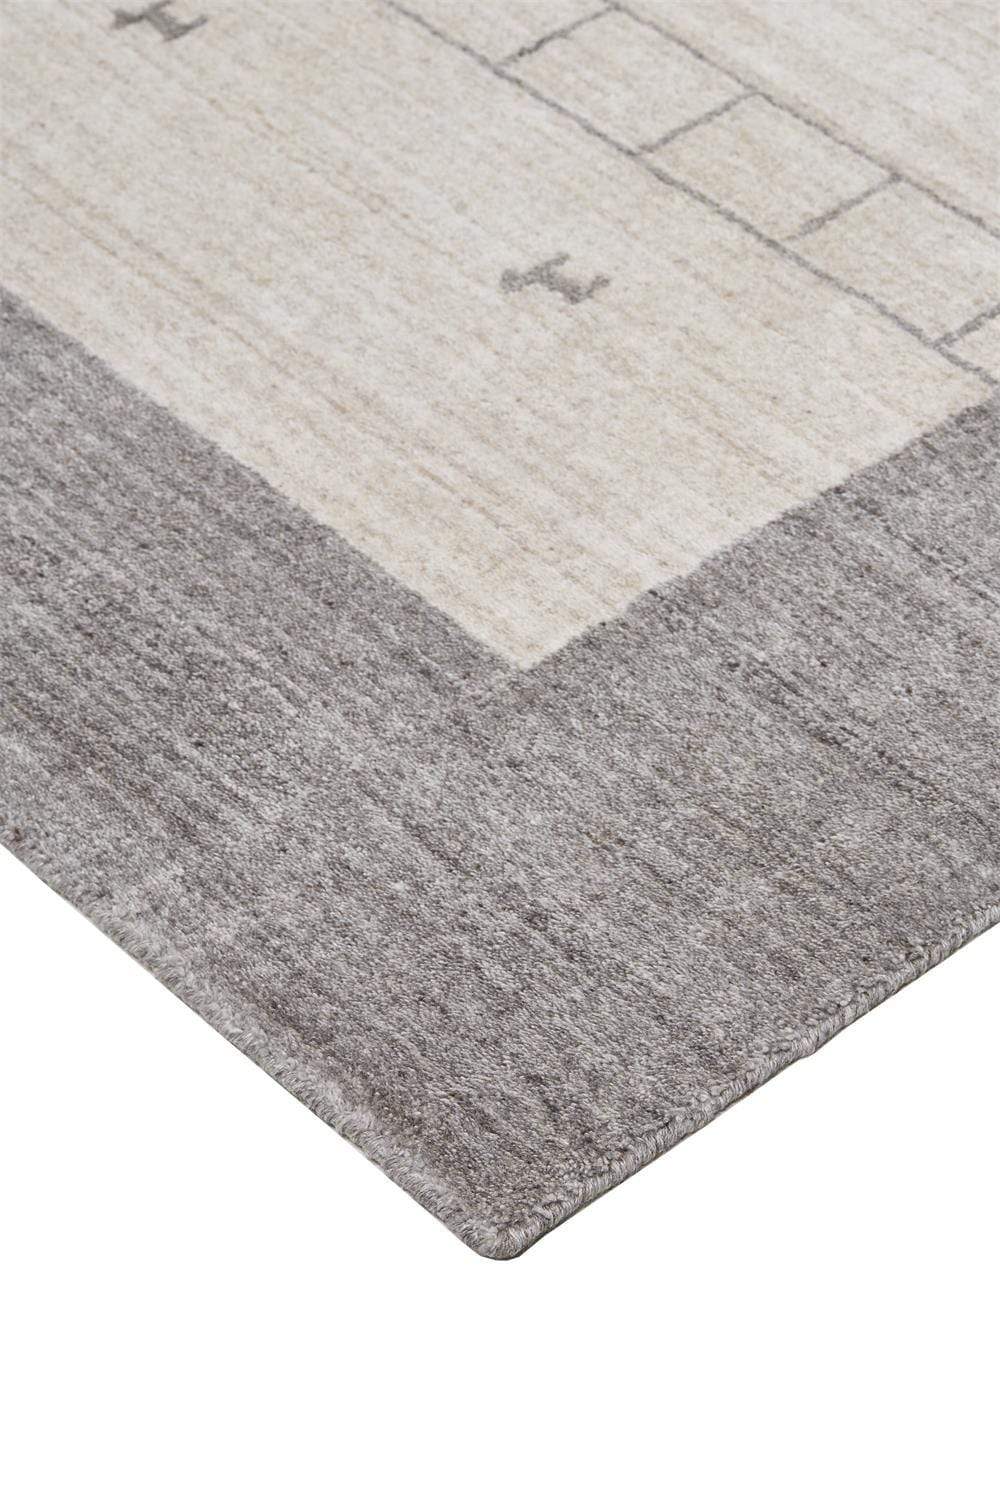 Feizy Feizy Legacy Contemporary Gebbah Rug - Beige & Warm Gray - Available in 6 Sizes